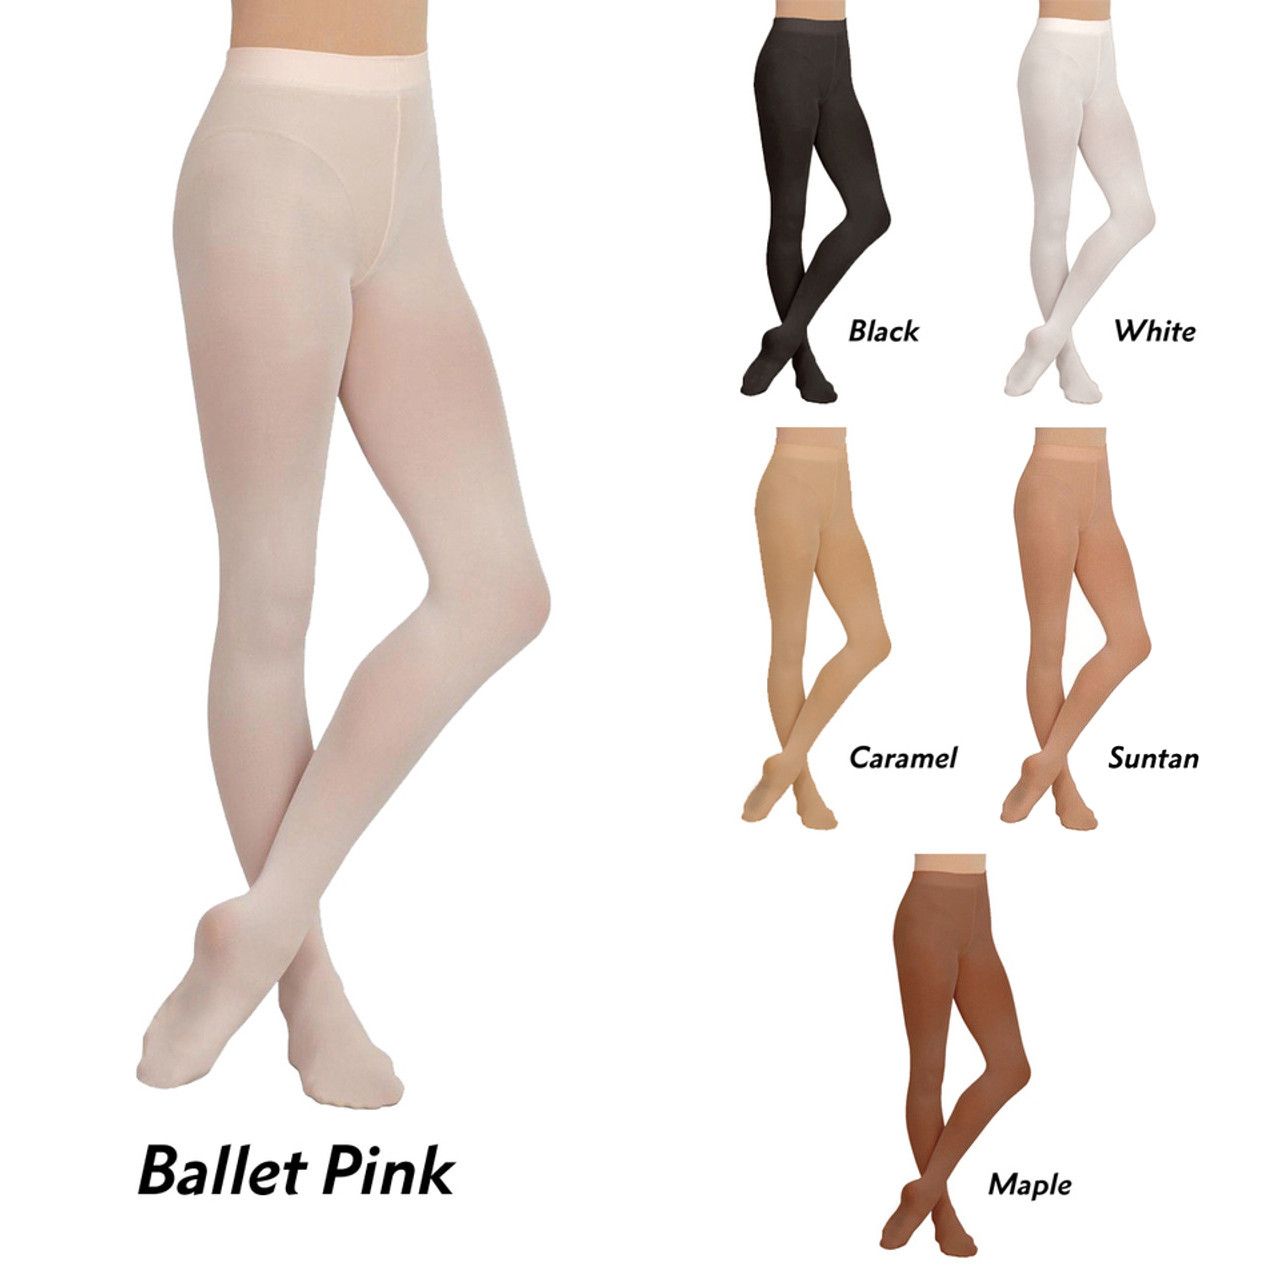 https://cdn11.bigcommerce.com/s-xc834ou1la/images/stencil/1280x1280/products/388/9398/1915_Footed_Tights_cover_photo__87322.1676507138.jpg?c=1